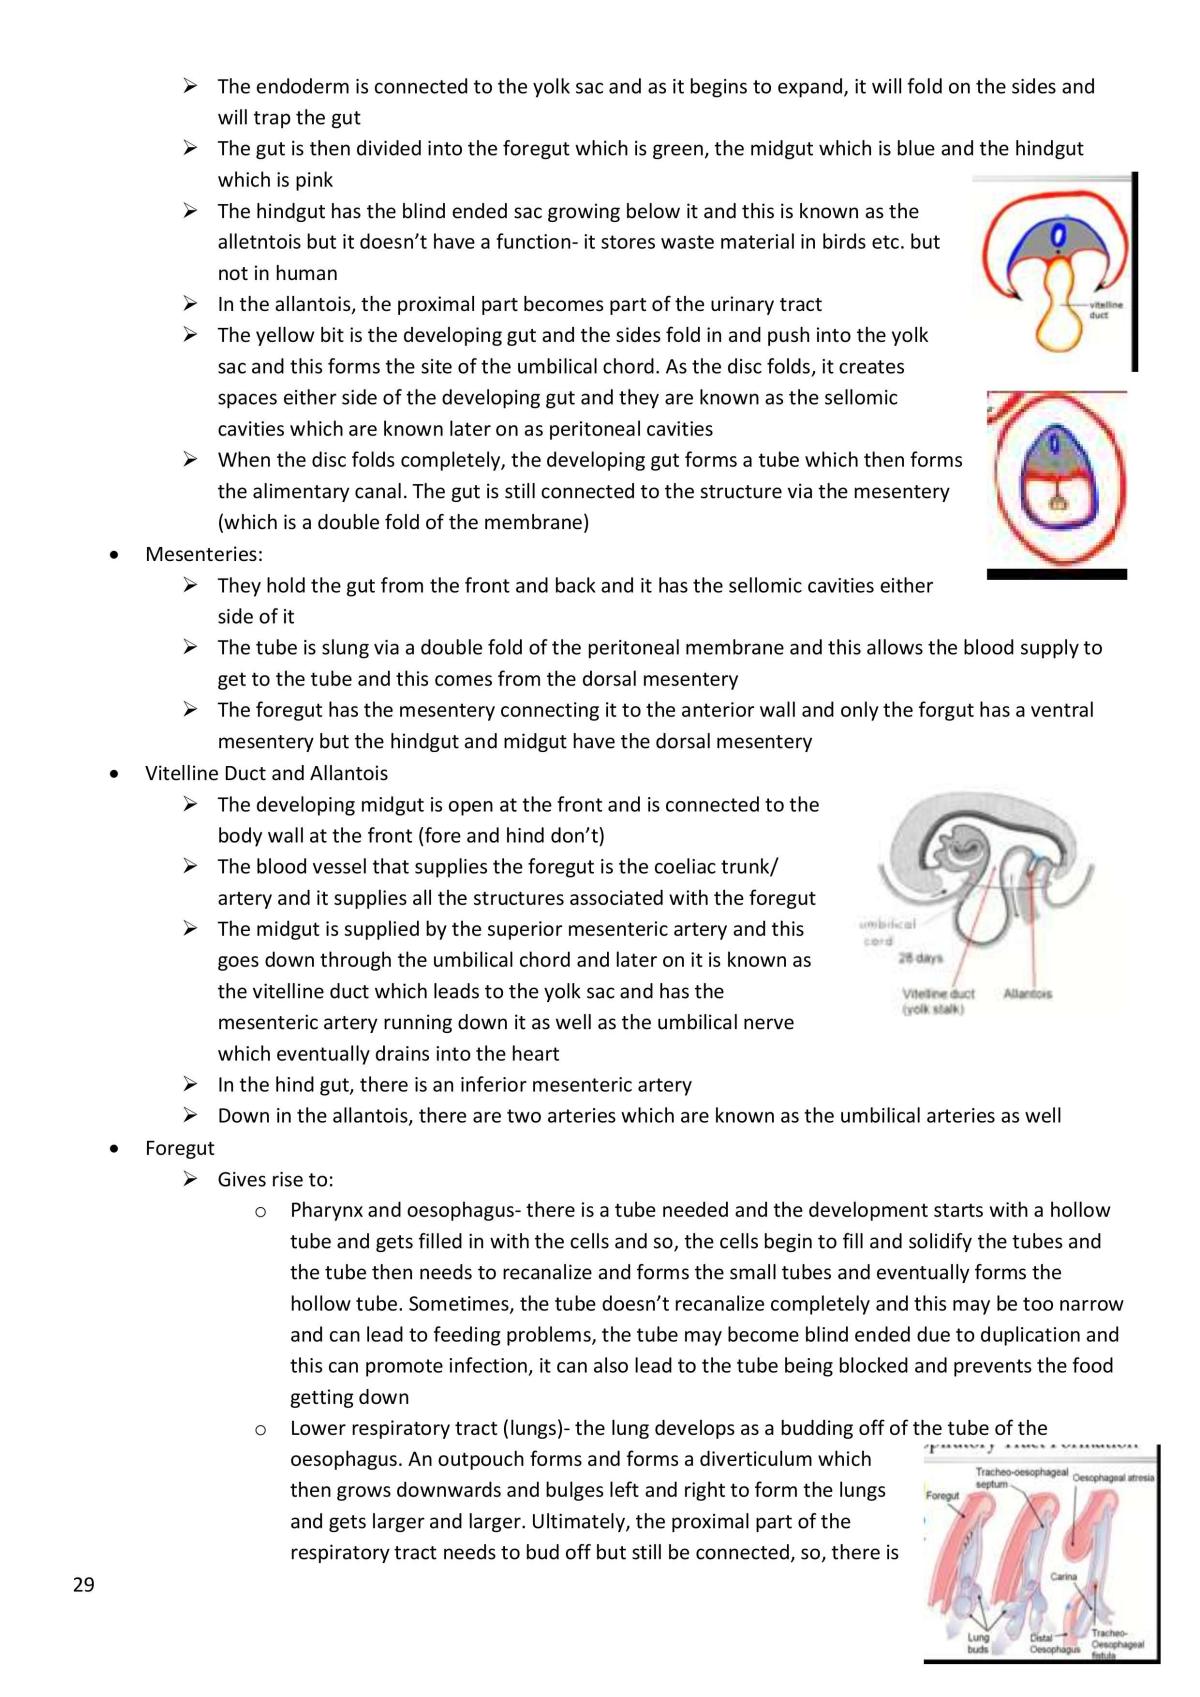 Functional Anatomy and Embryology - Page 29